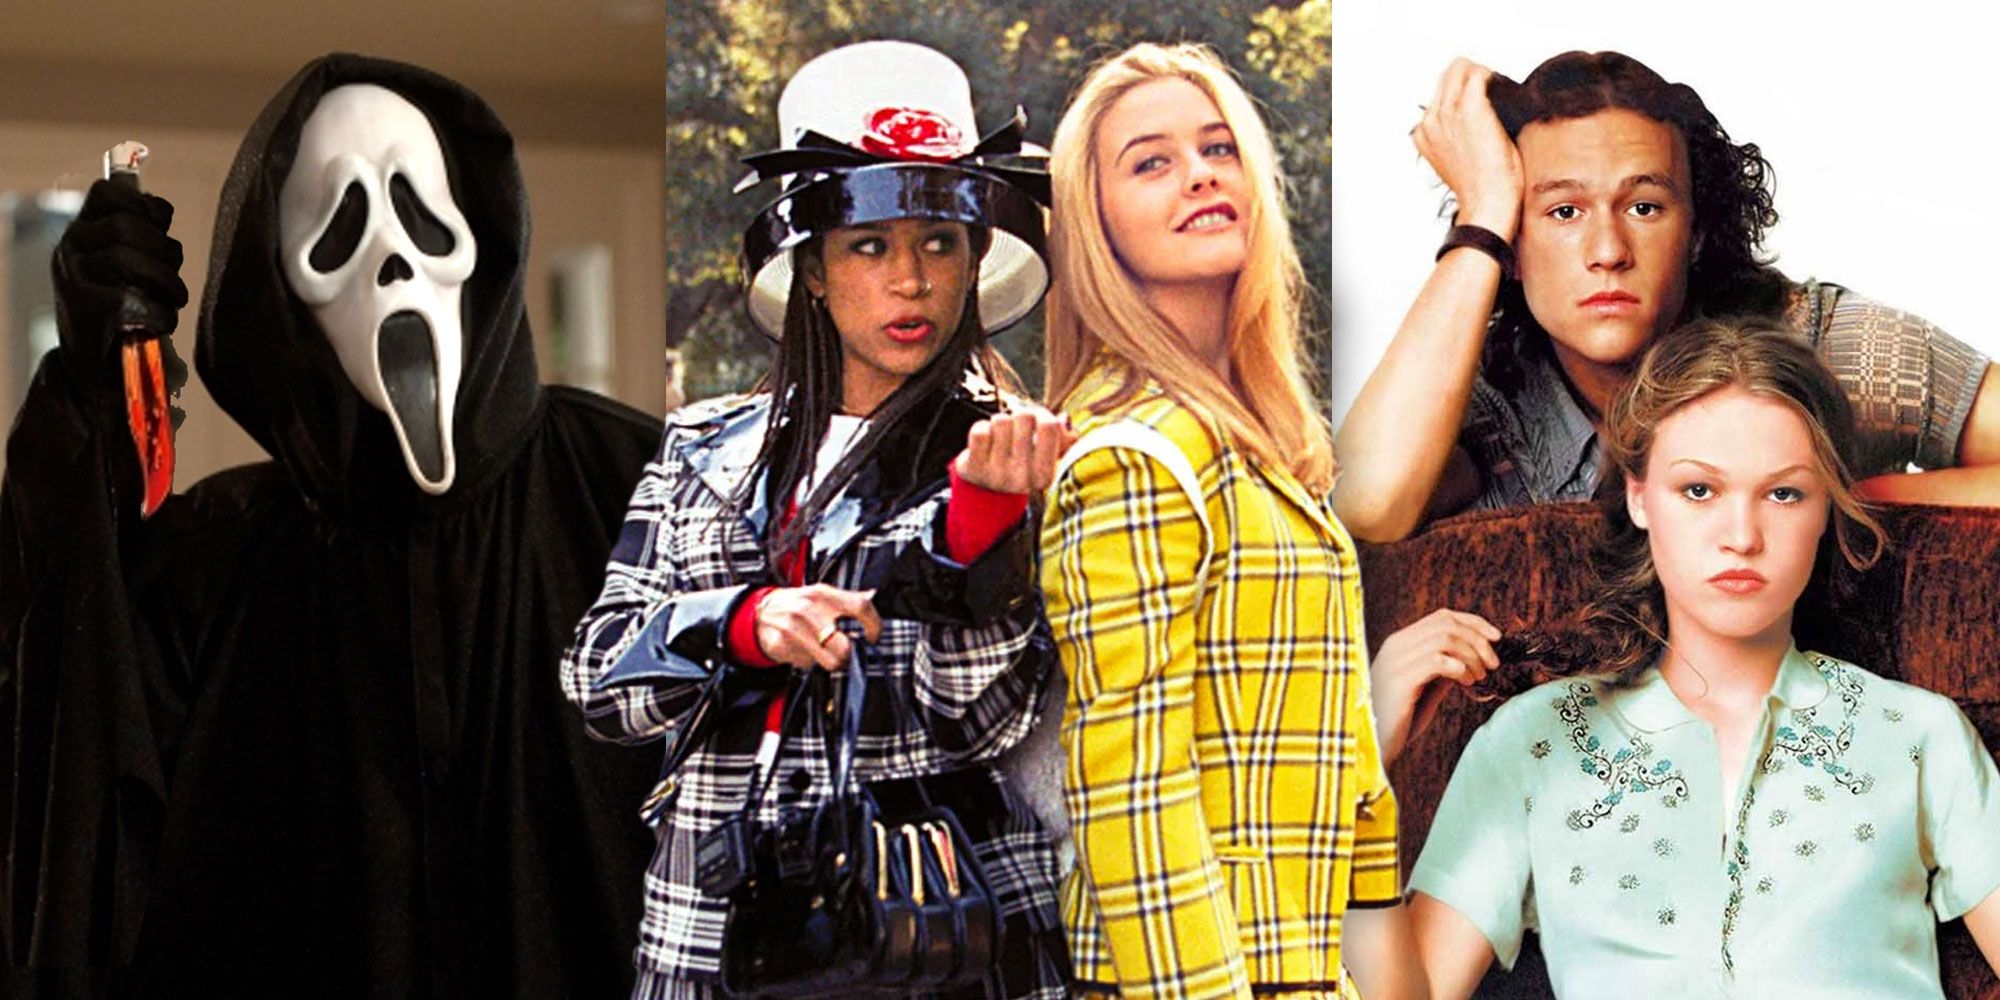 A split image features characters from 90s teen movies Scream, Clueless, and 10 Things I Hate About You